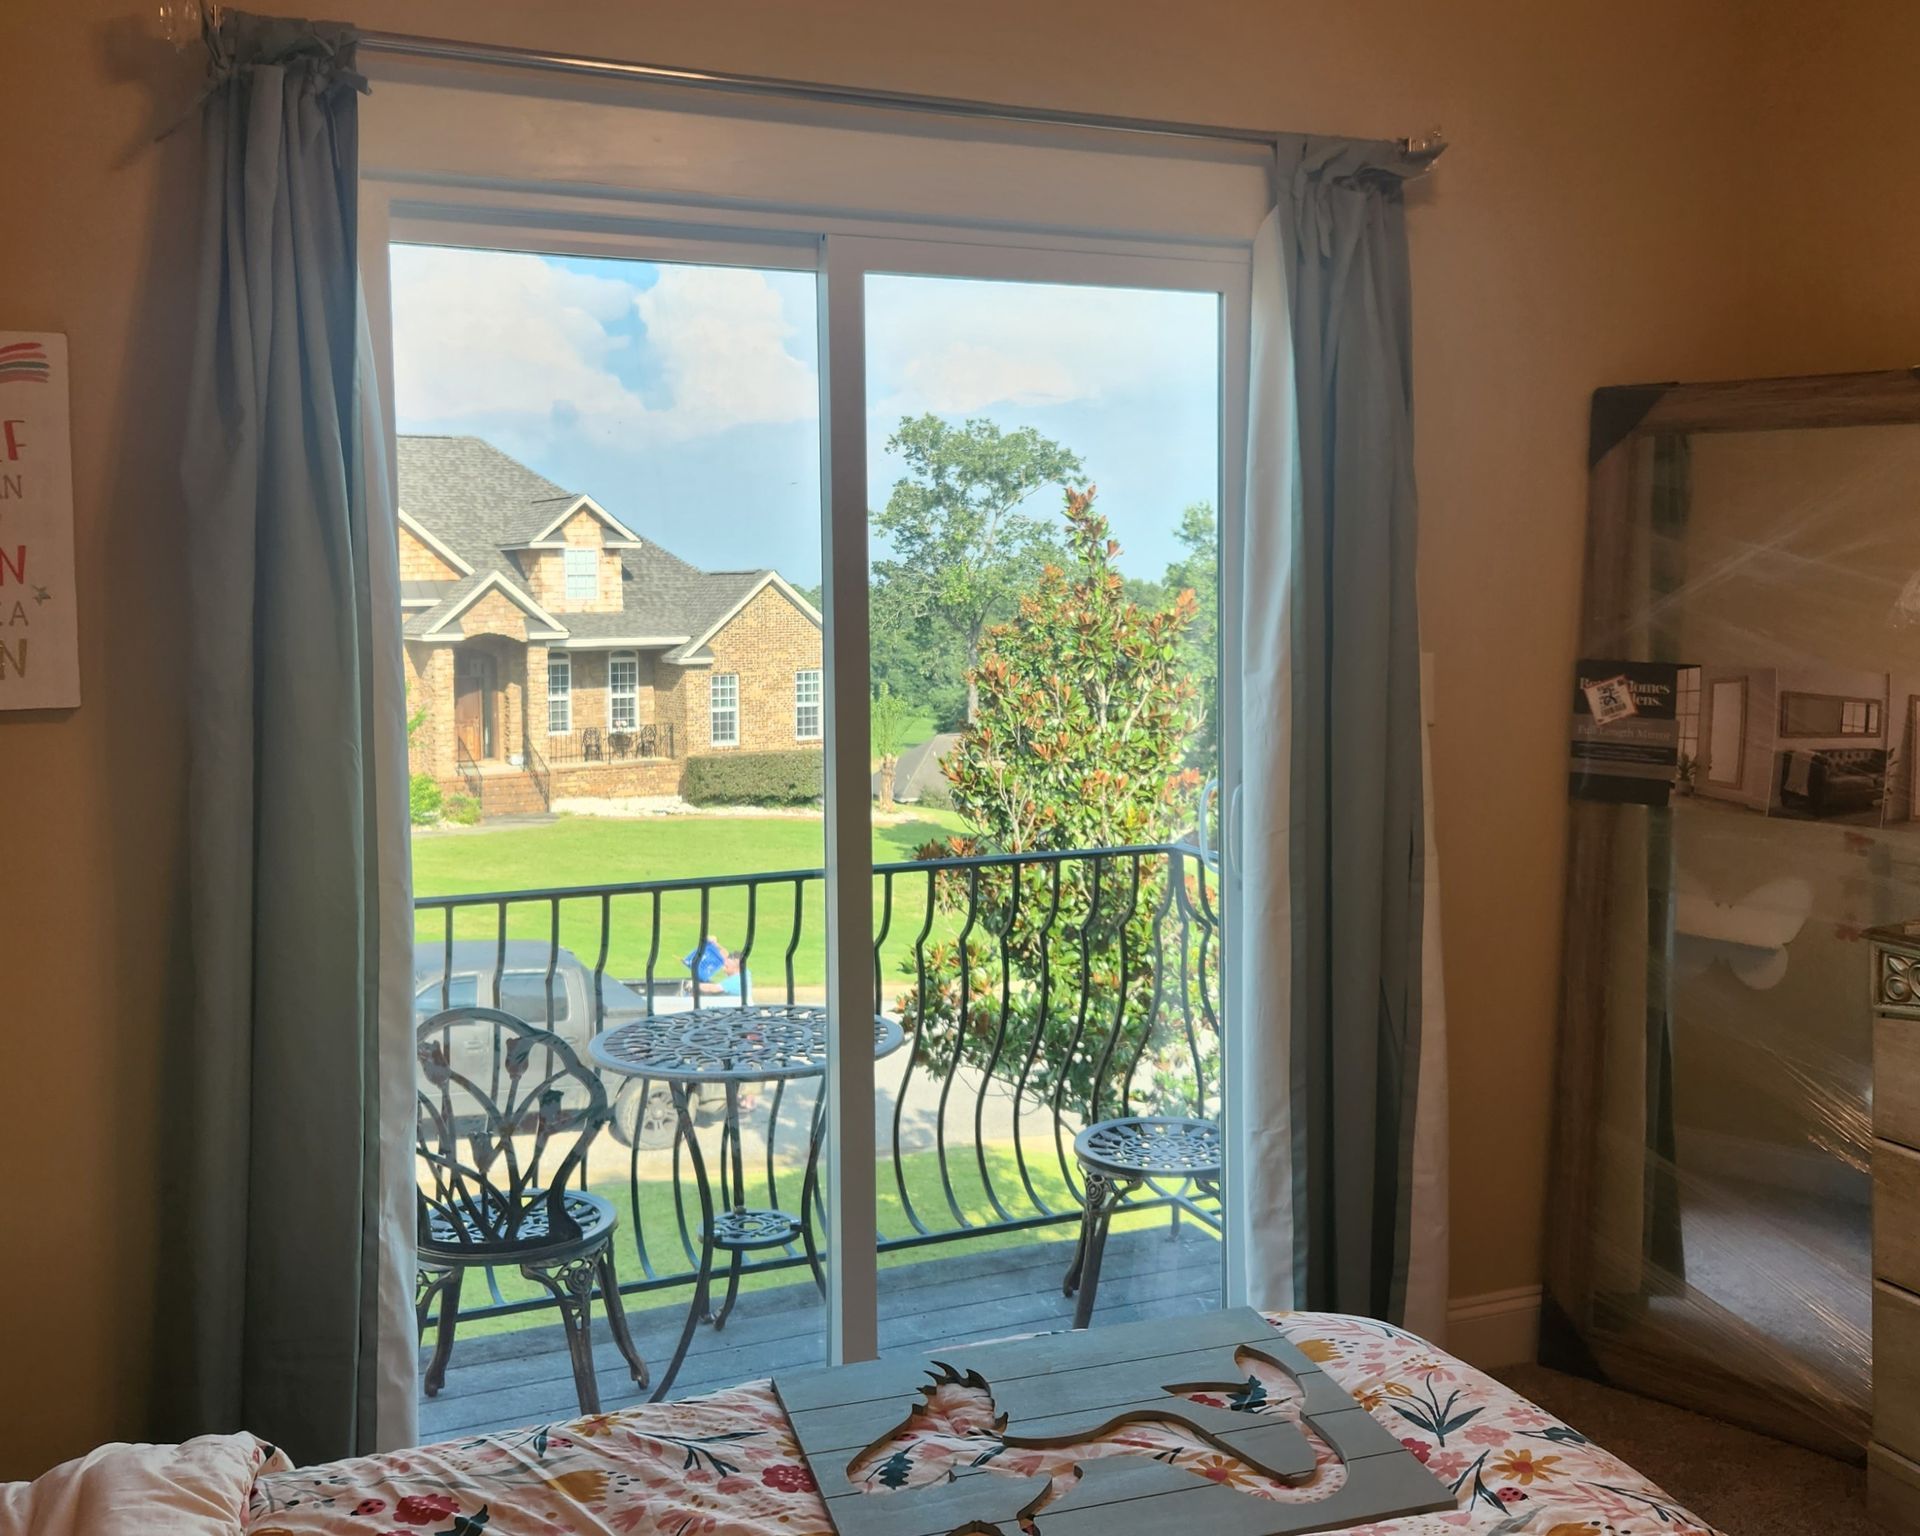 window tinting - One-way Privacy was achieved along with adding the perfect amount of natural light. SPF Home Tint installed in Millbrook.